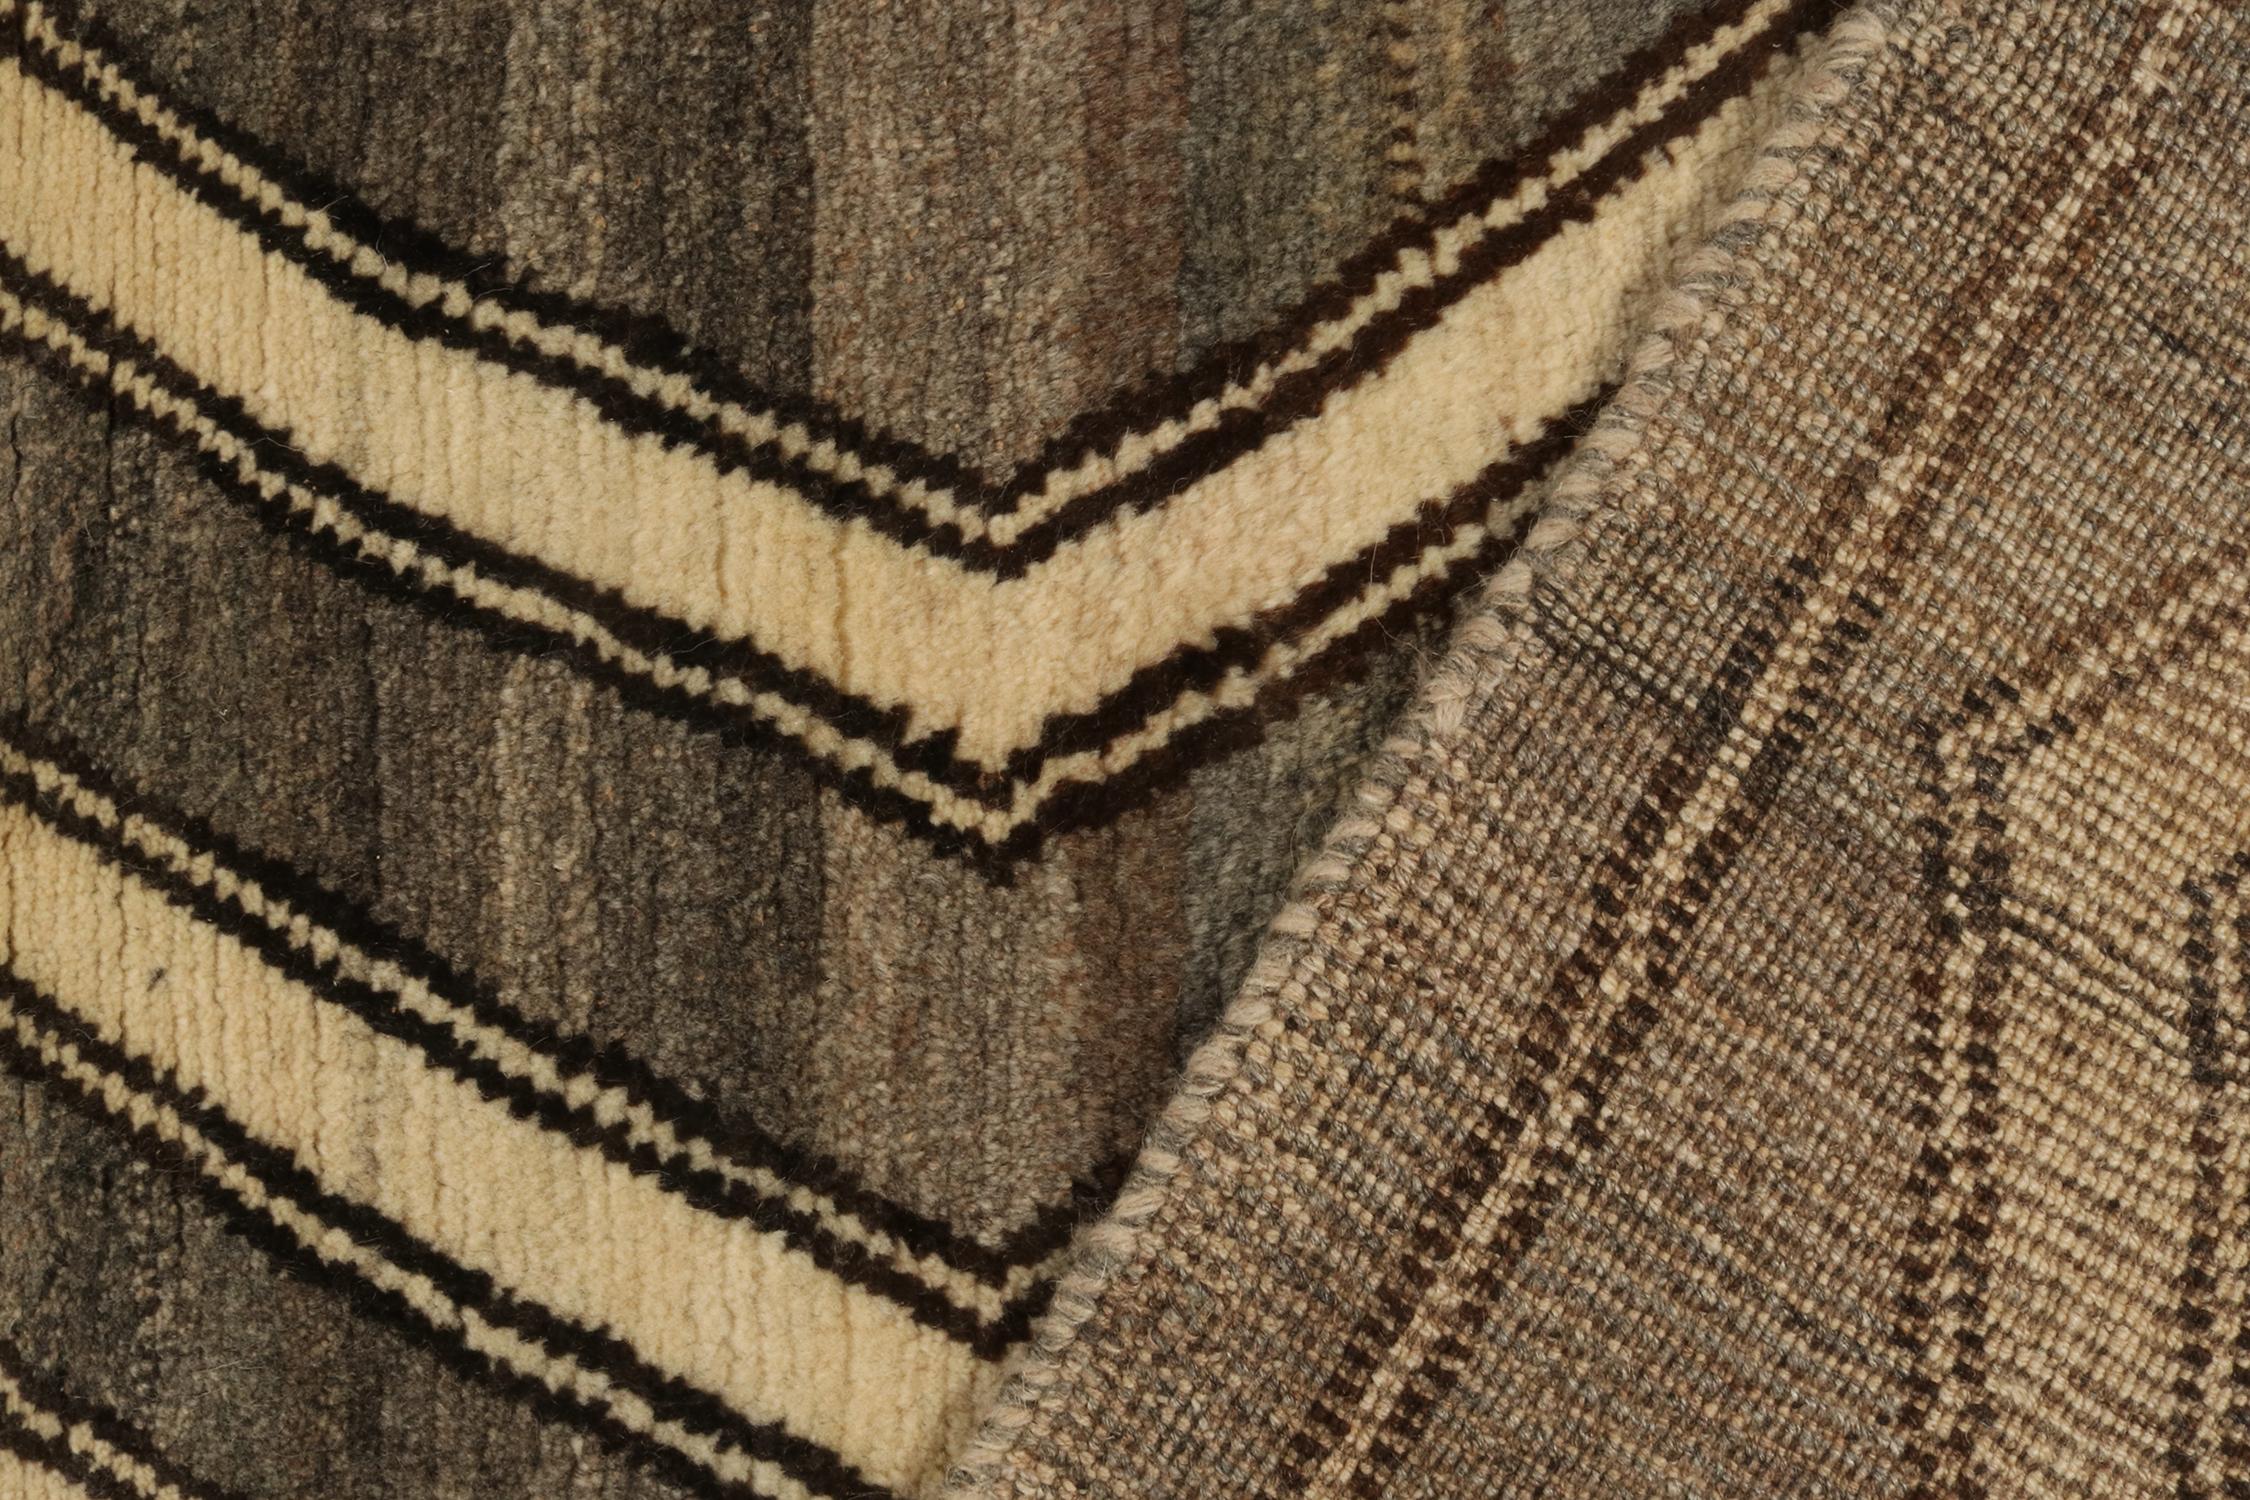 Vintage Gabbeh Rug in Gray and Beige-Brown Chevron Patterns by Rug & Kilim In Good Condition For Sale In Long Island City, NY